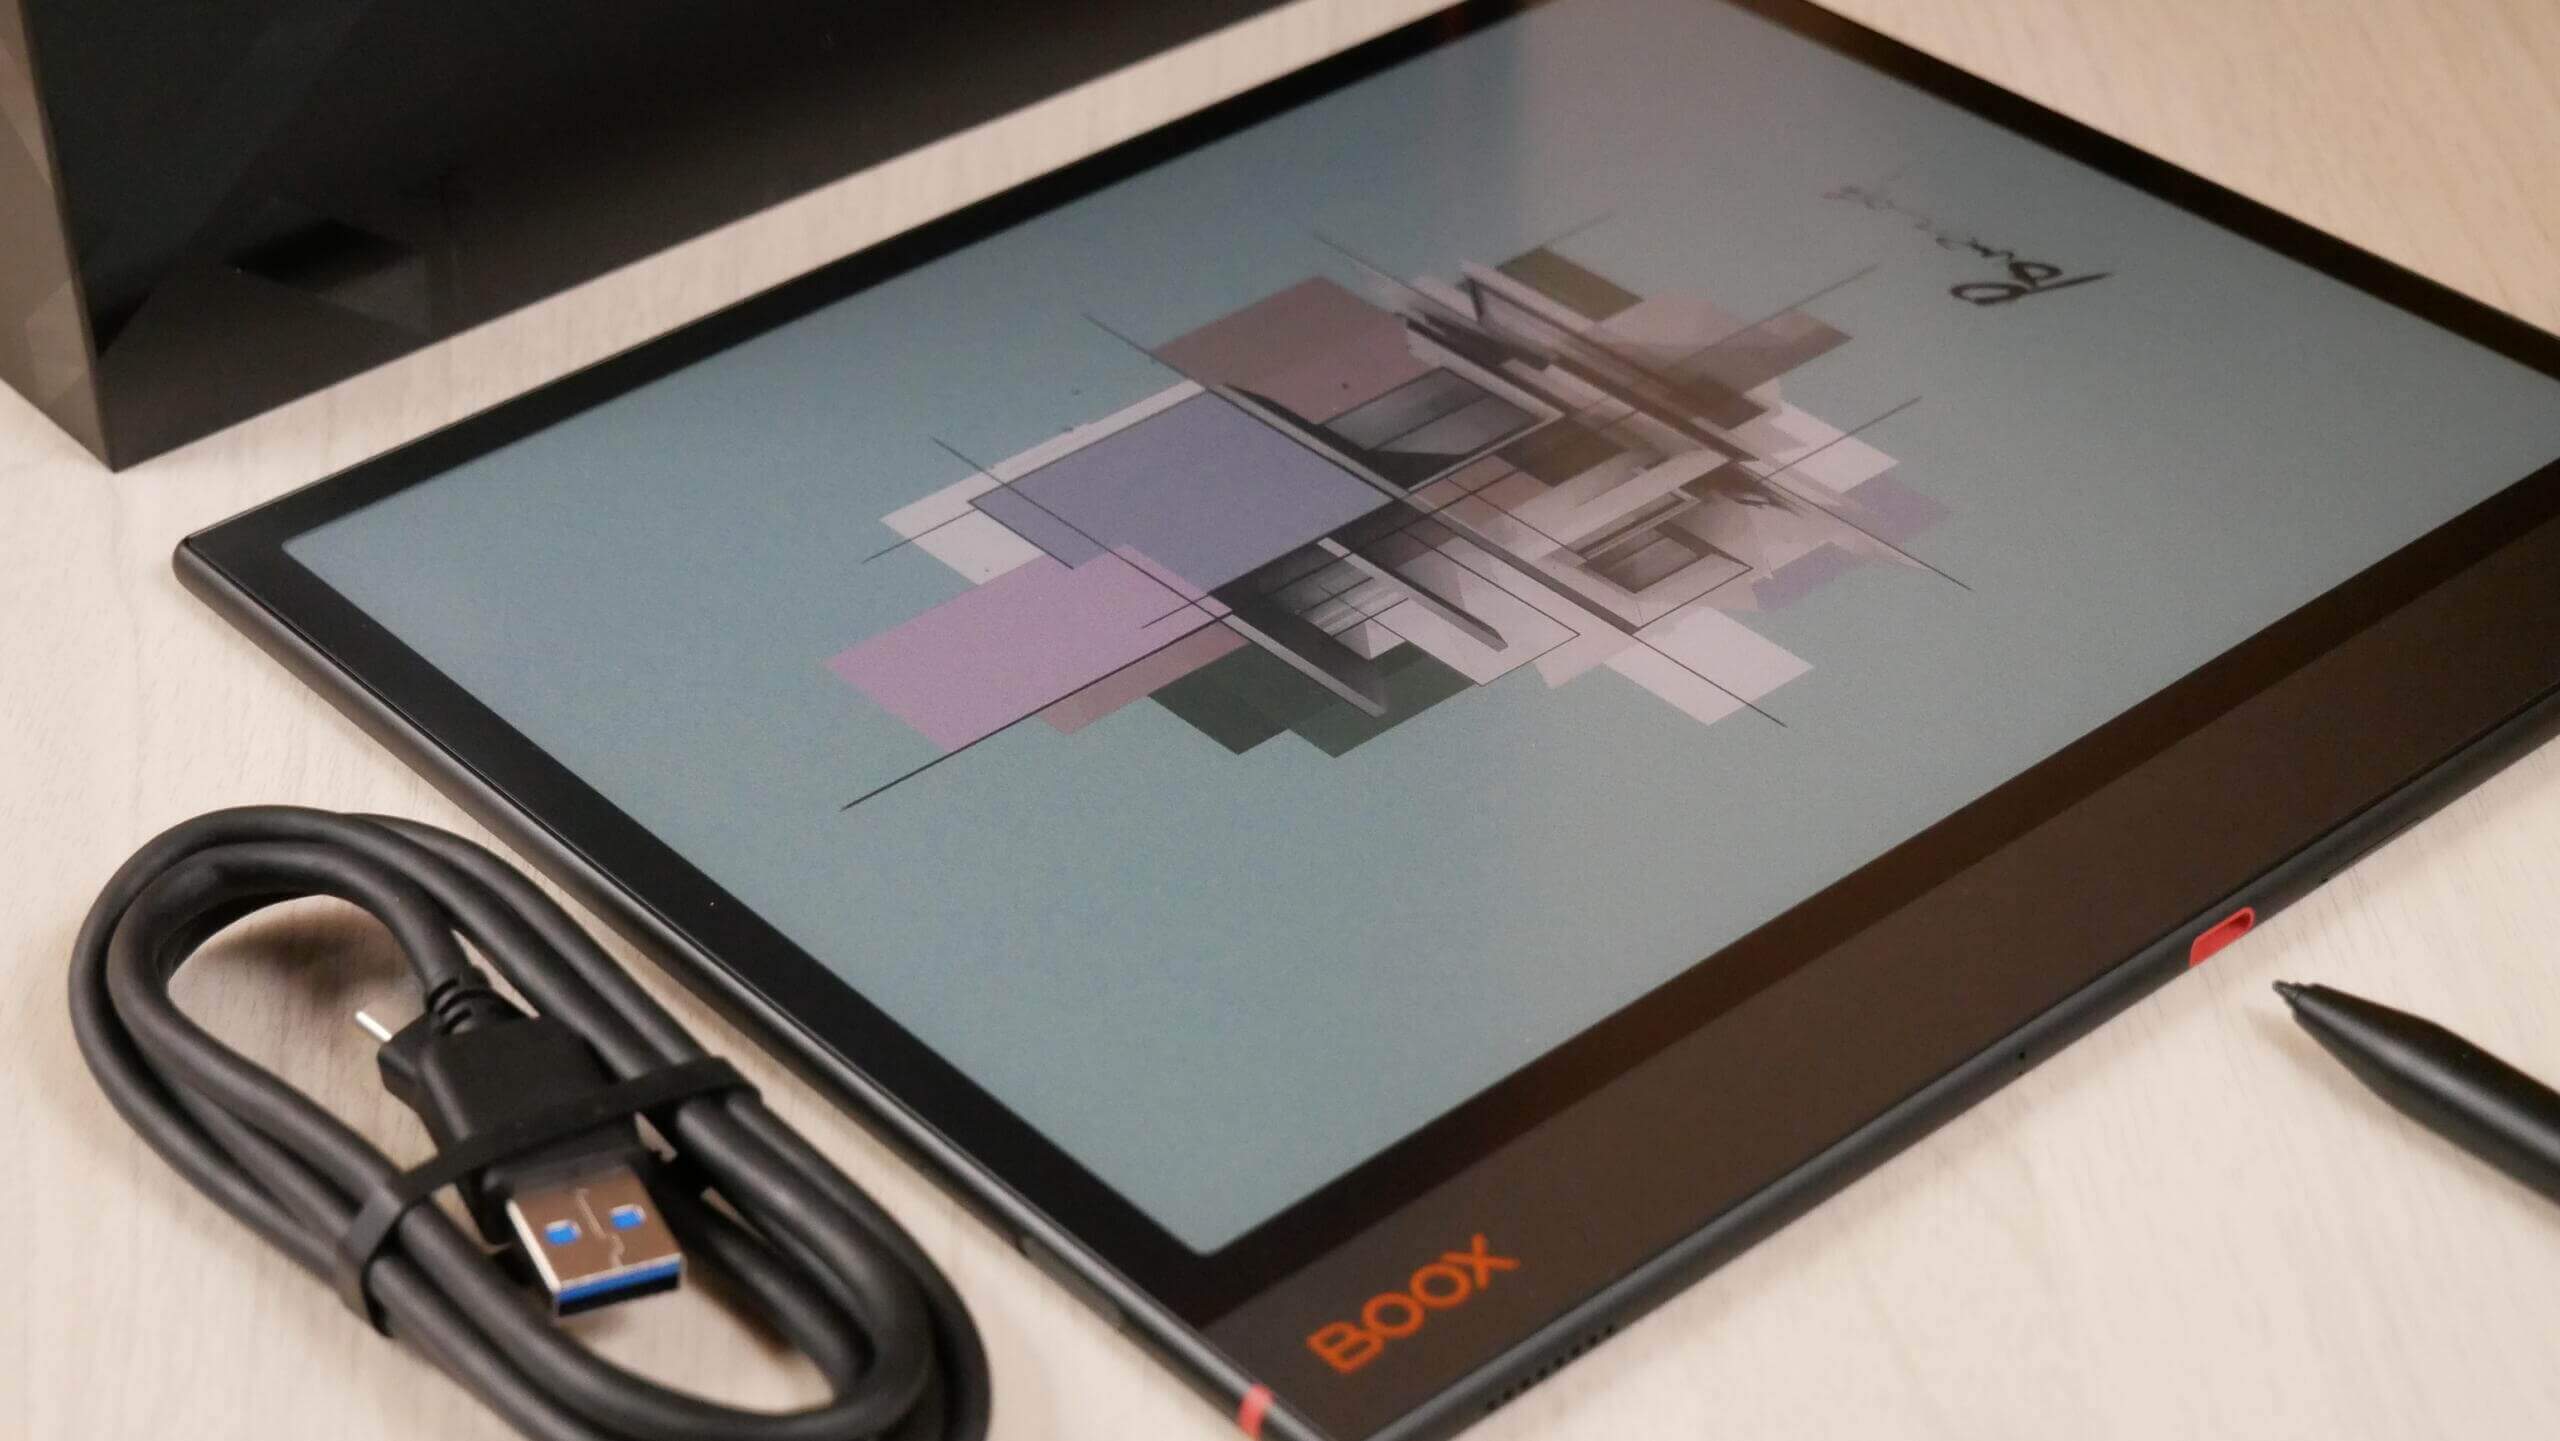 First look at the Oynx Boox Note Air 3 e-note - Good e-Reader